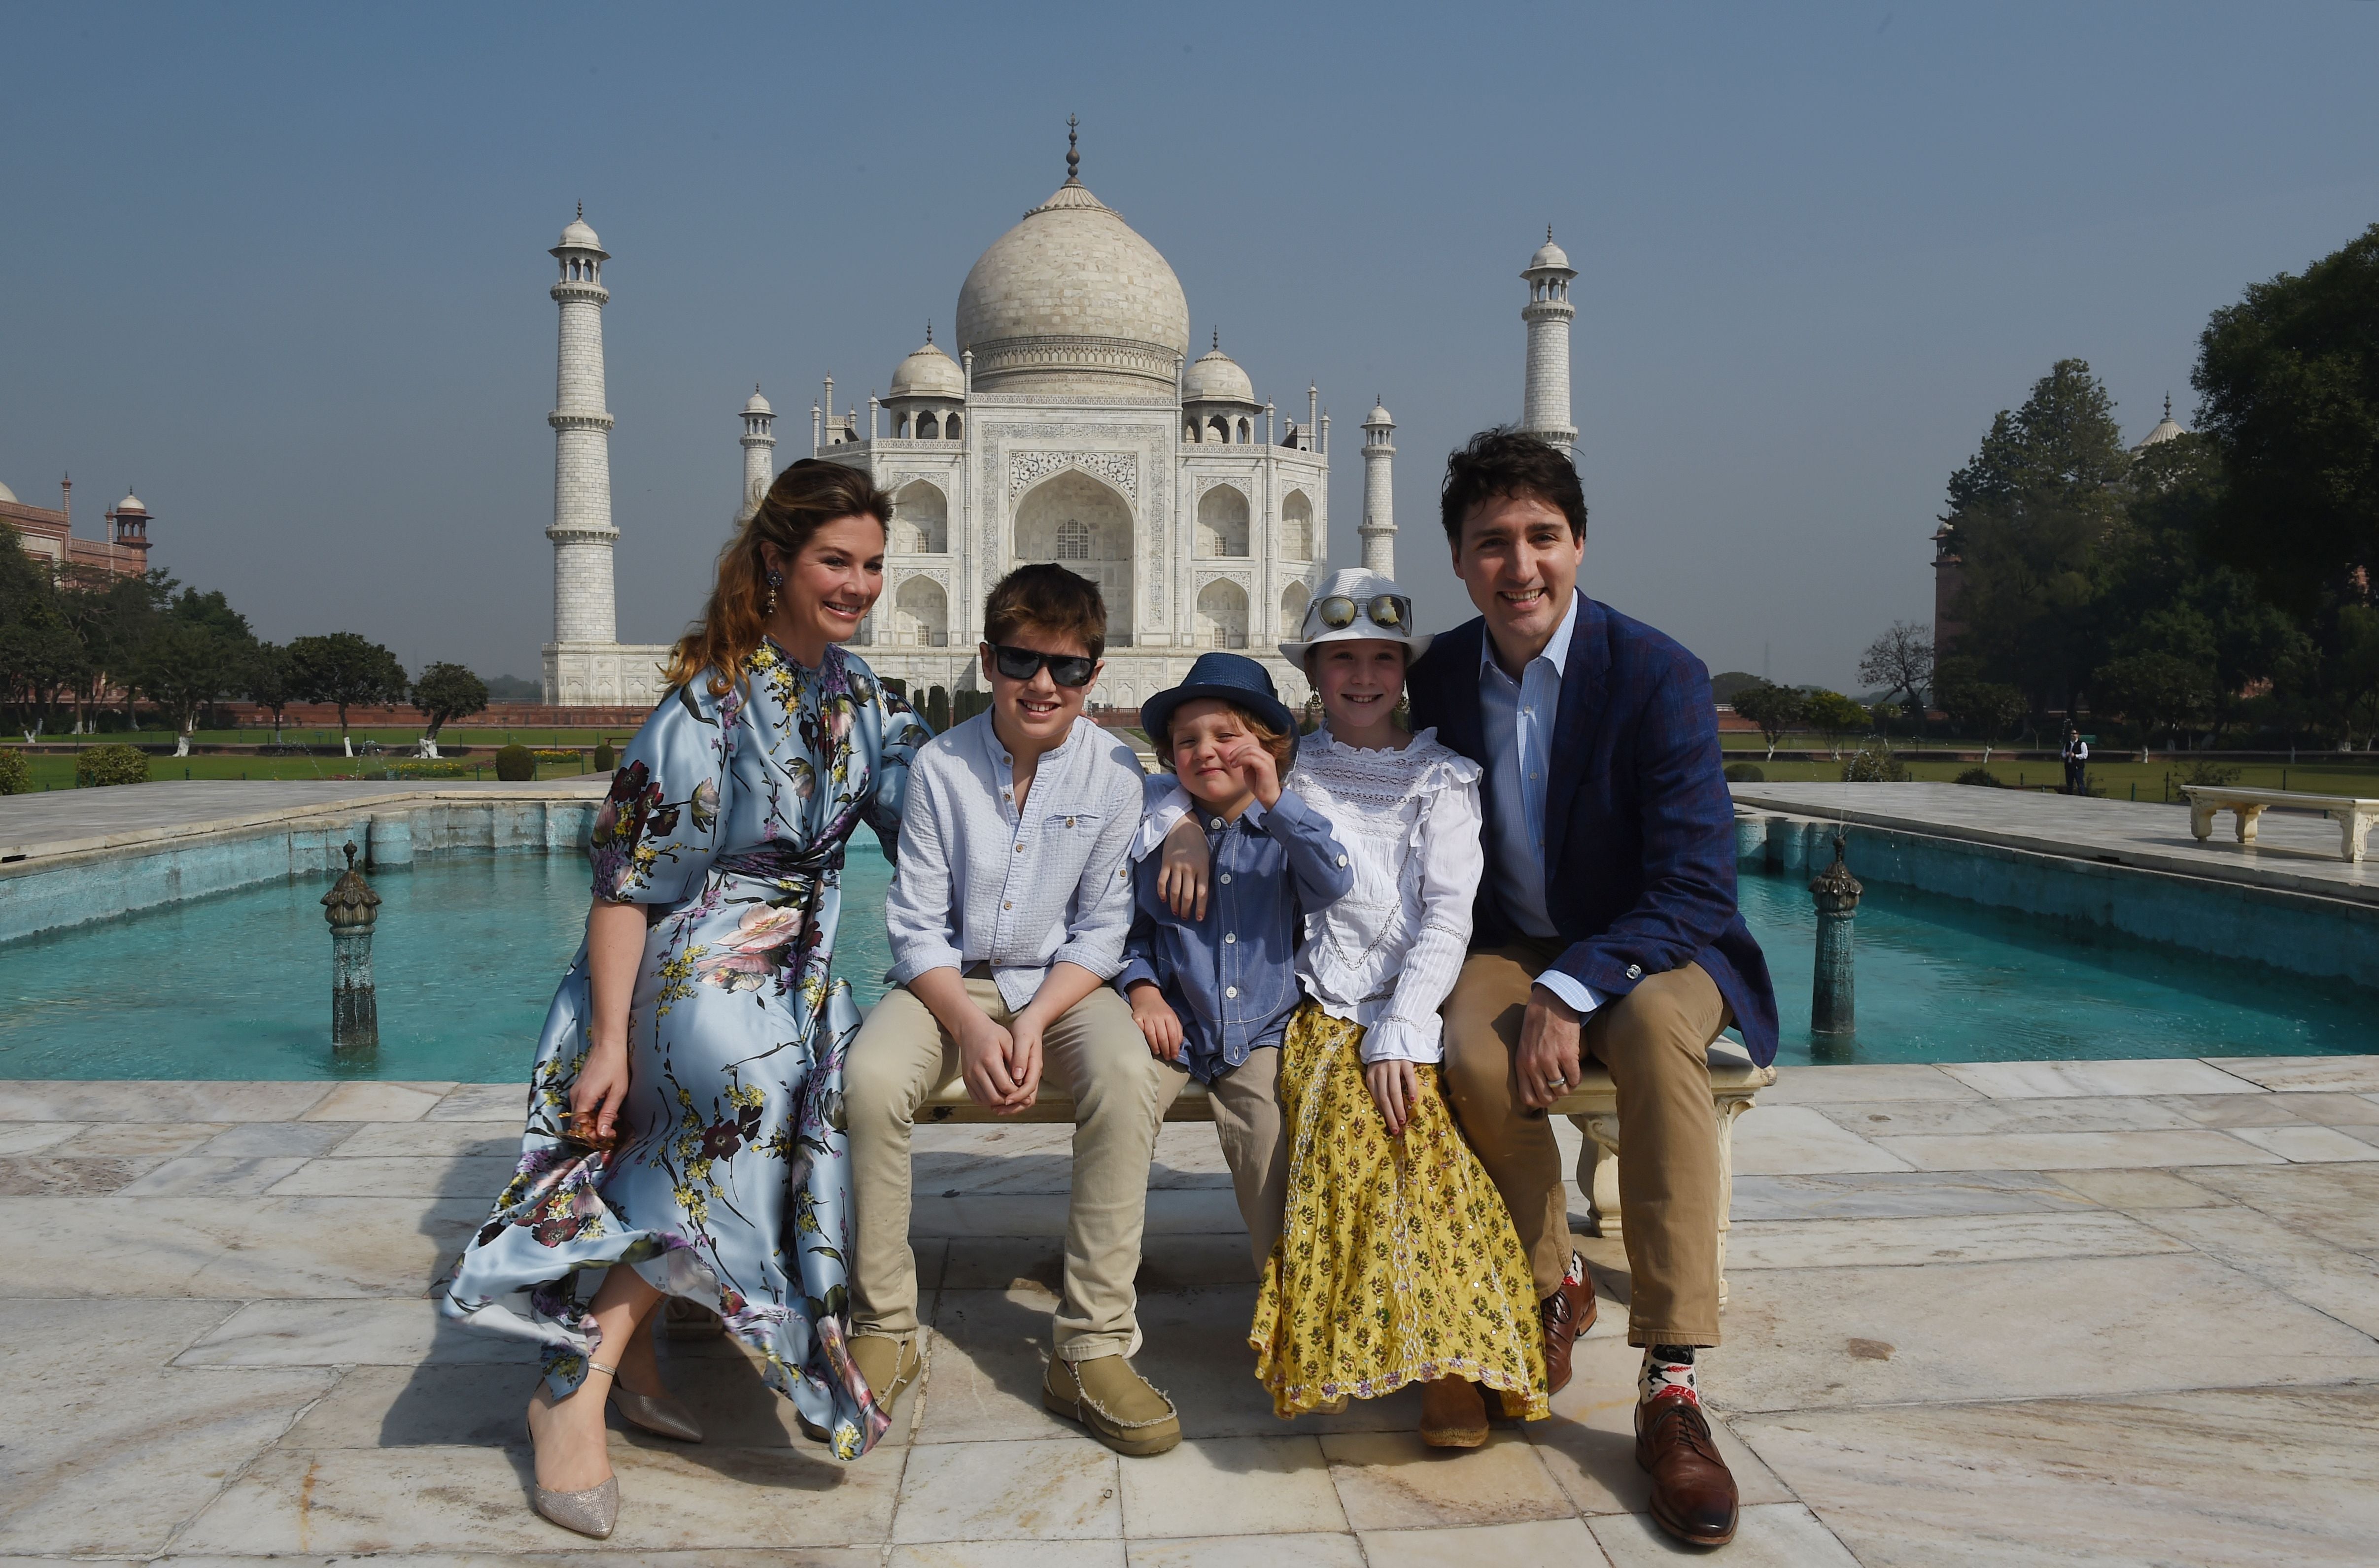 File Prime minister Justin Trudeau, his wife Sophie Gregoire and their children pose for a photograph during their visit to Taj Mahal in Agra on 18 February 2018